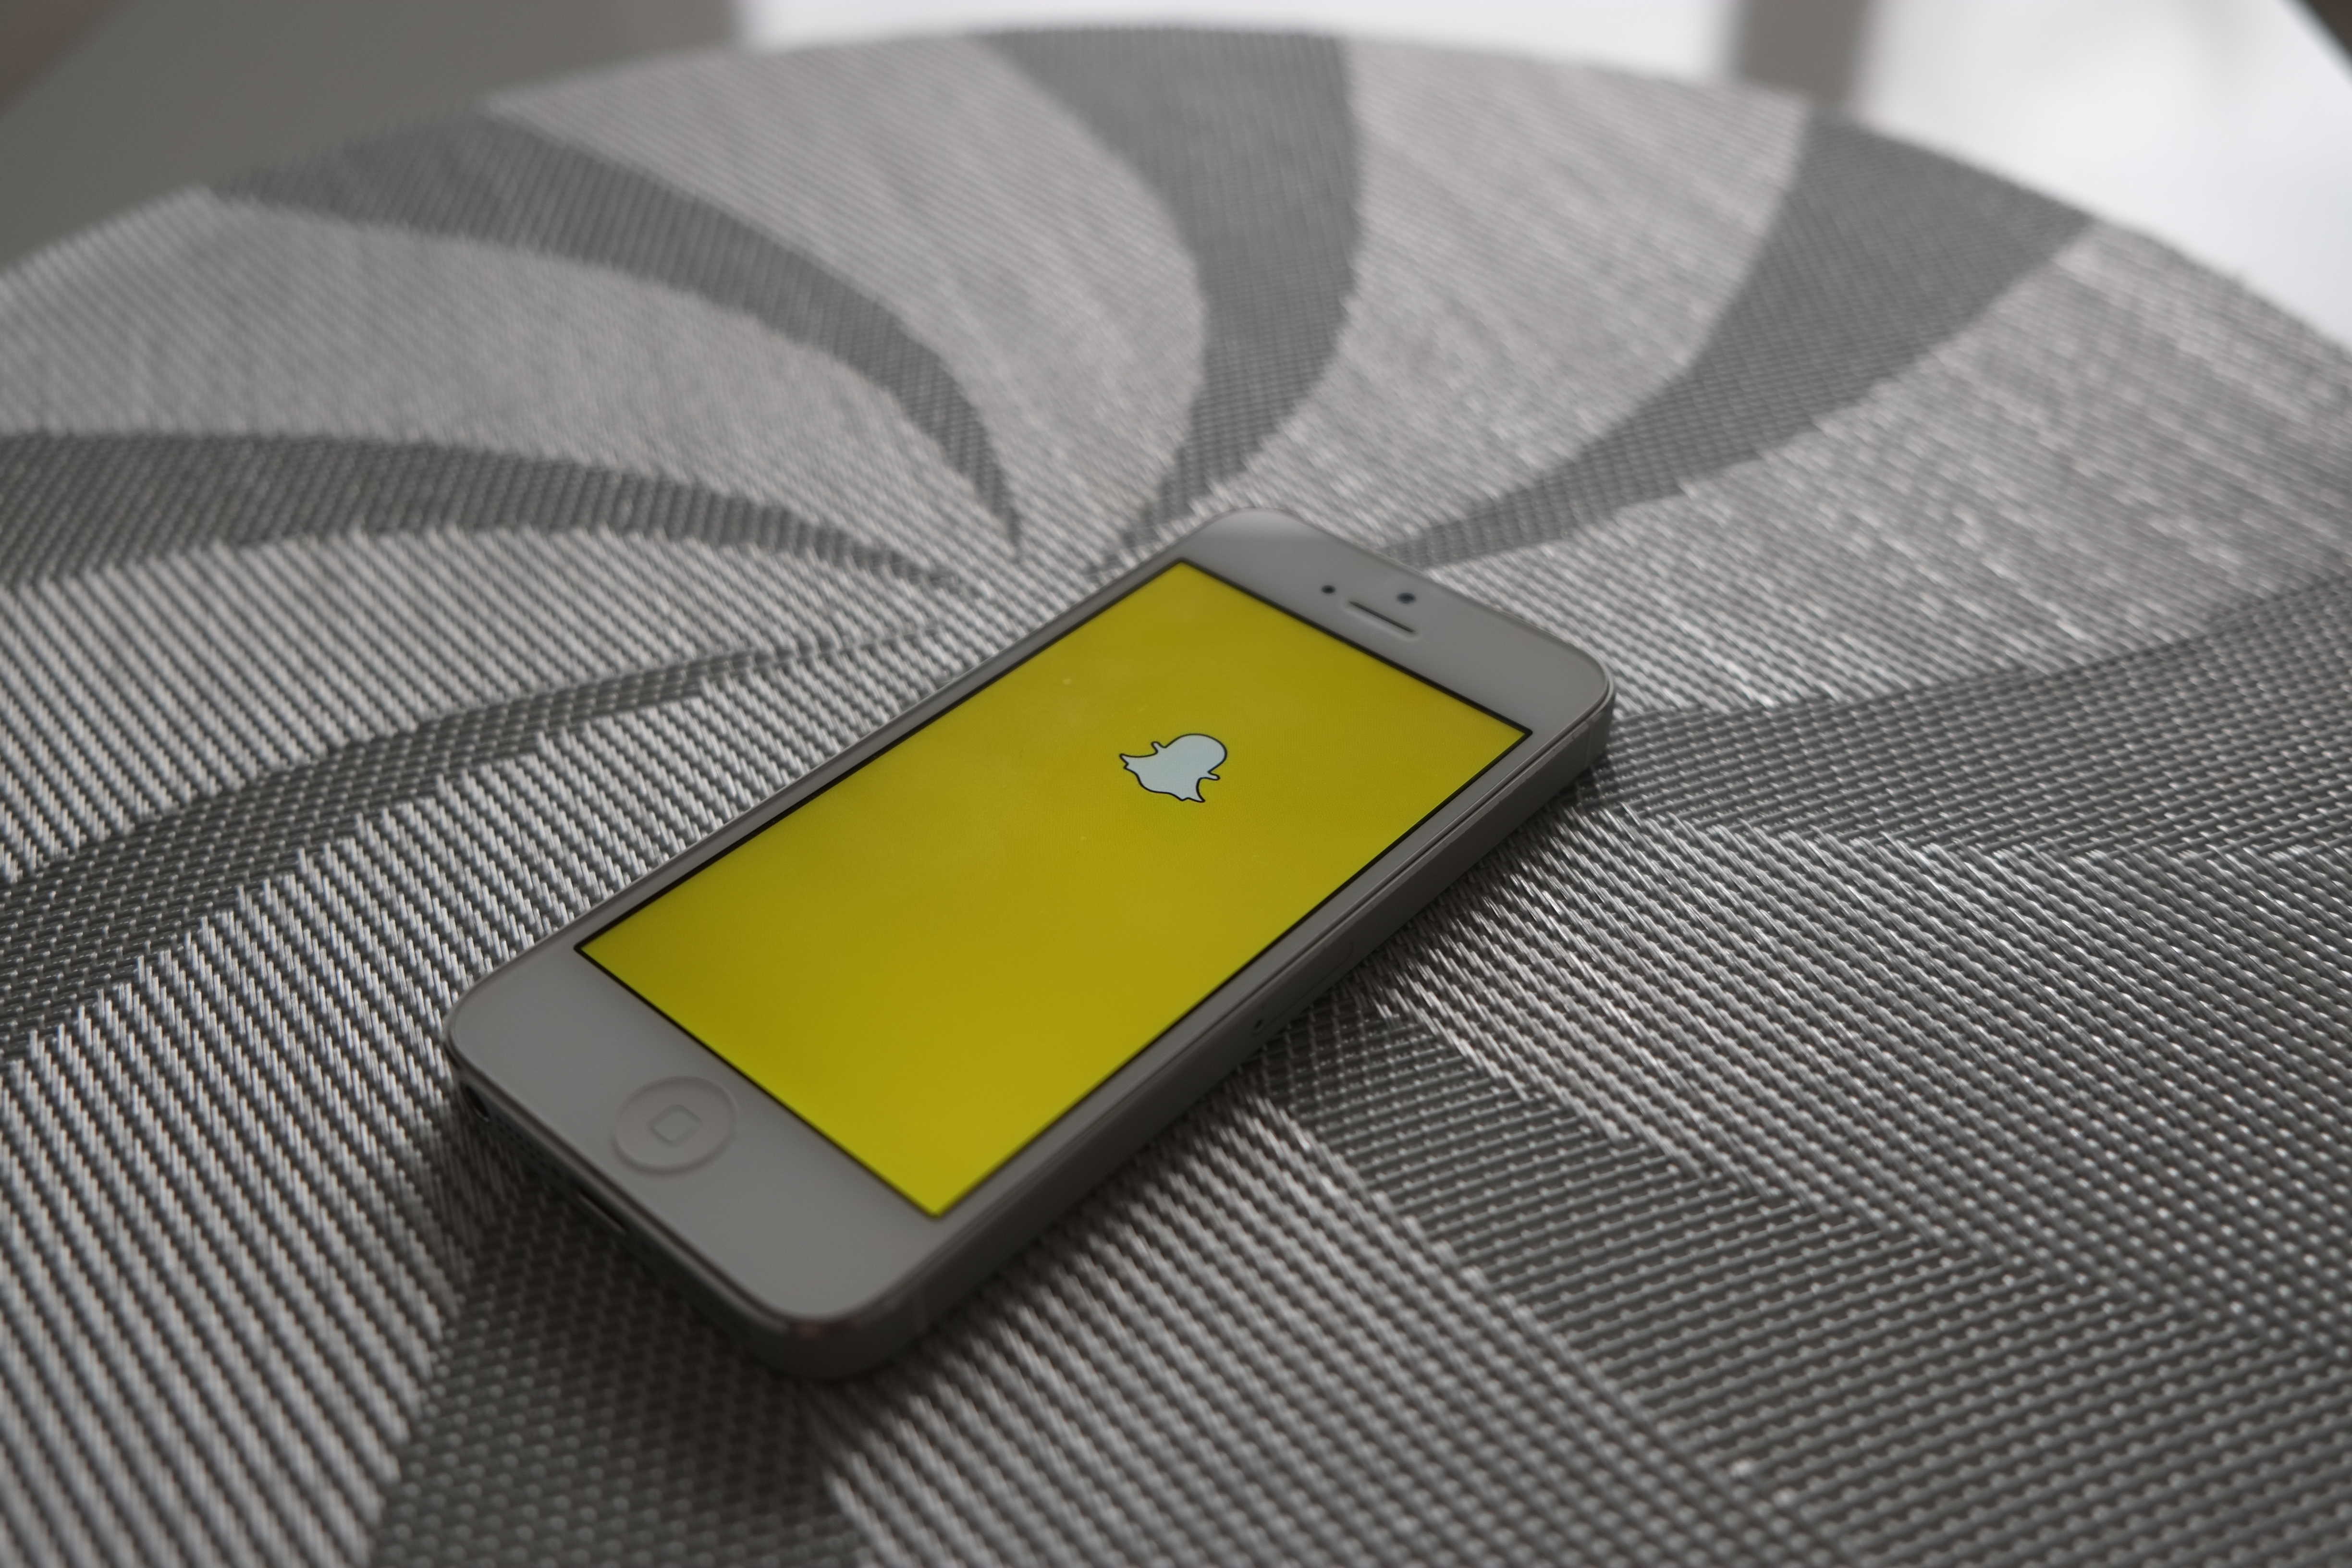 You can totally outsmart Snapchat's screenshot notifications.